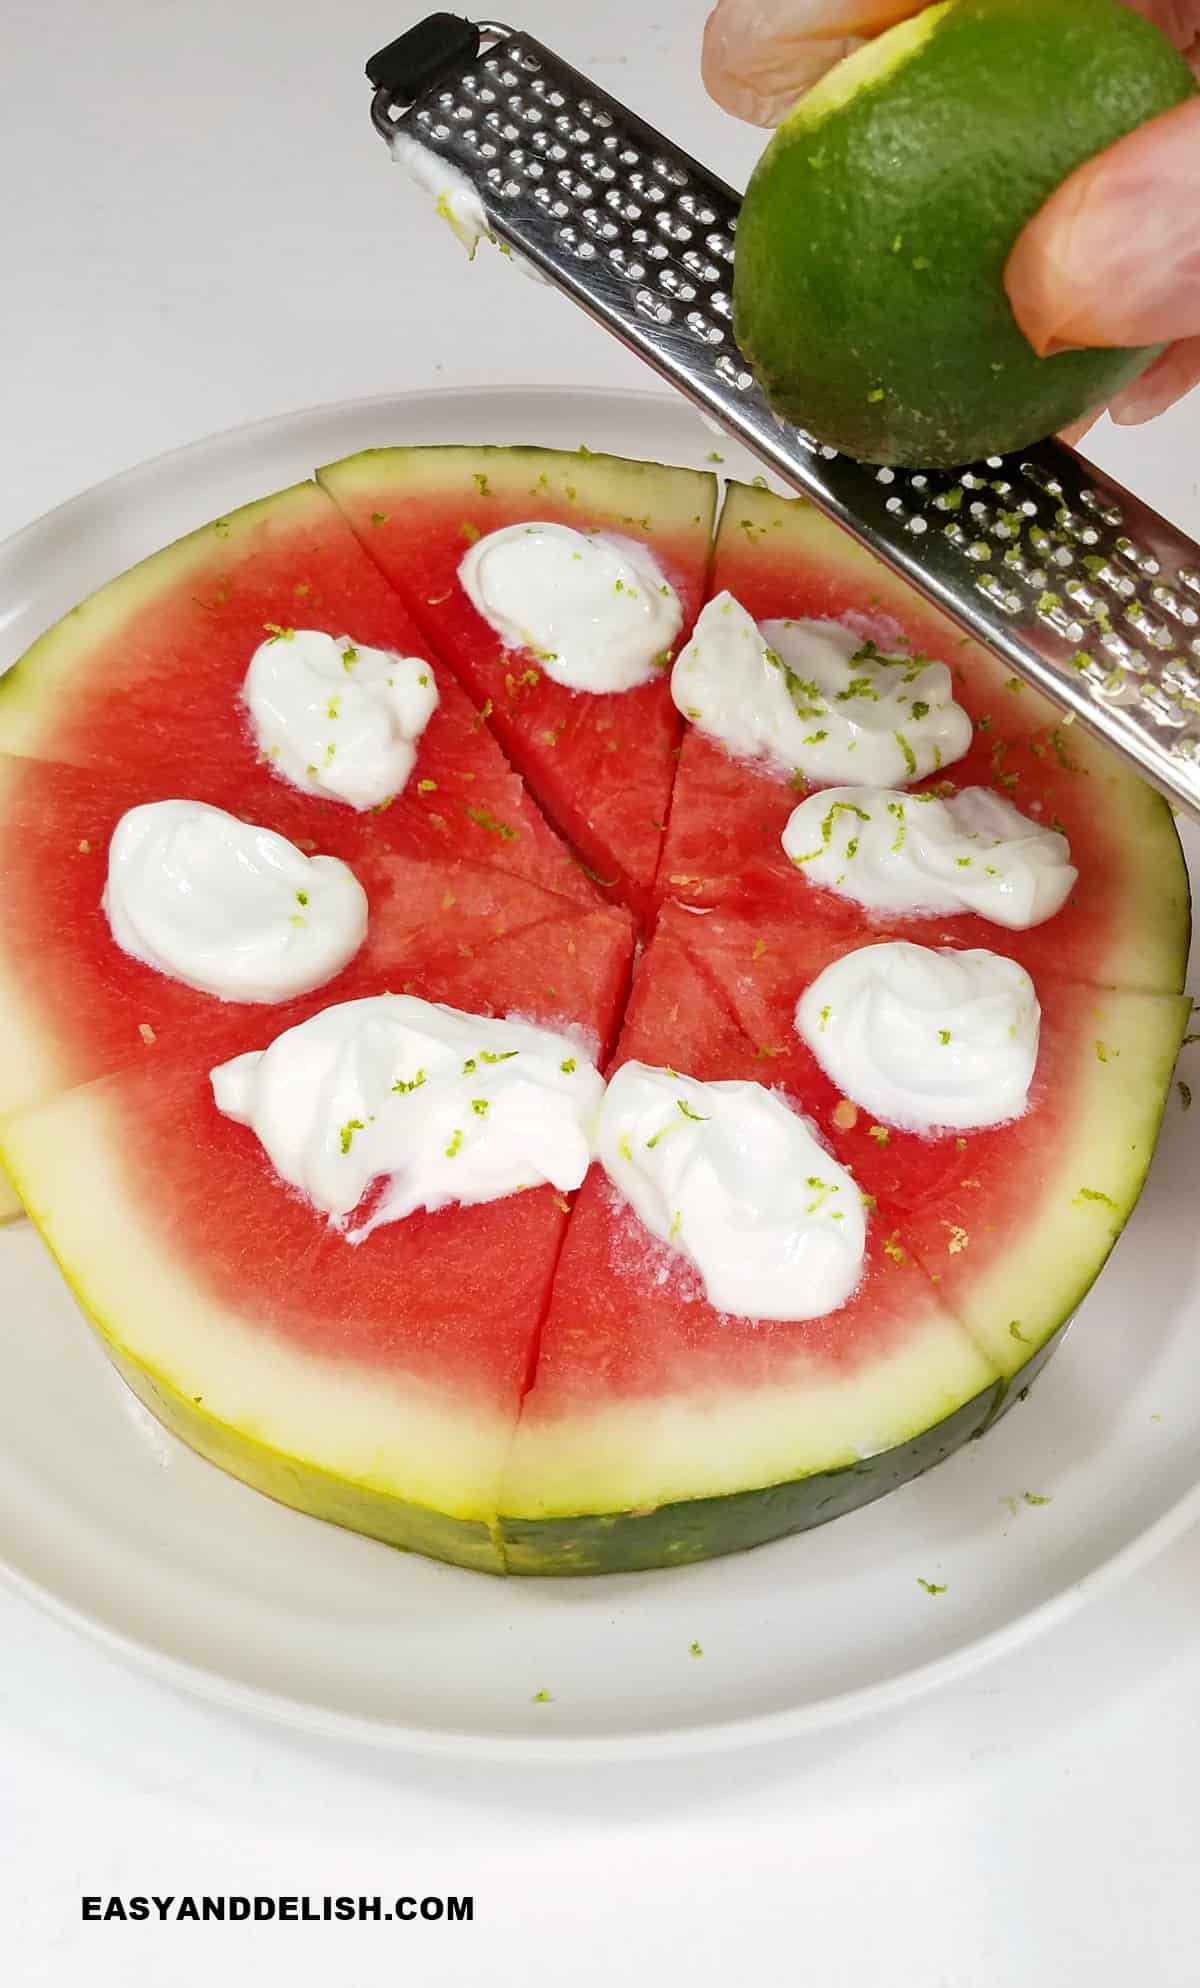 lime zested over a a slice of the fruit topped with yogurt.